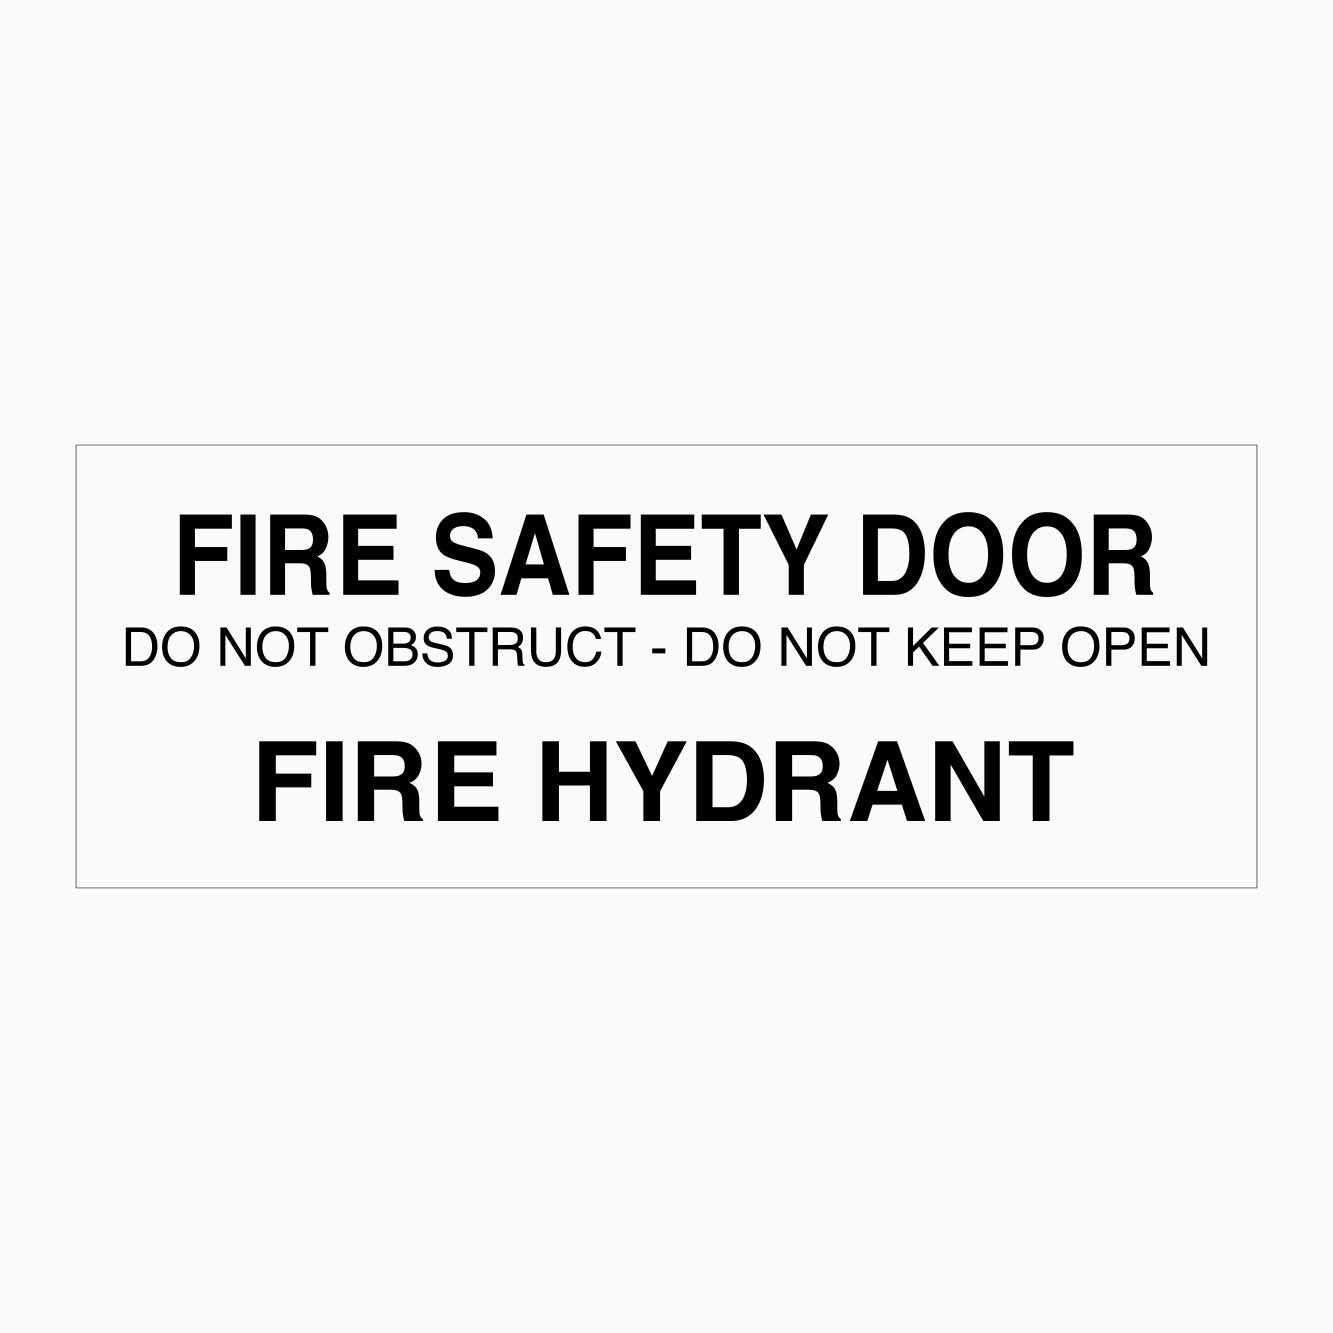 FIRE SAFETY DOOR and FIRE HYDRANT SIGN